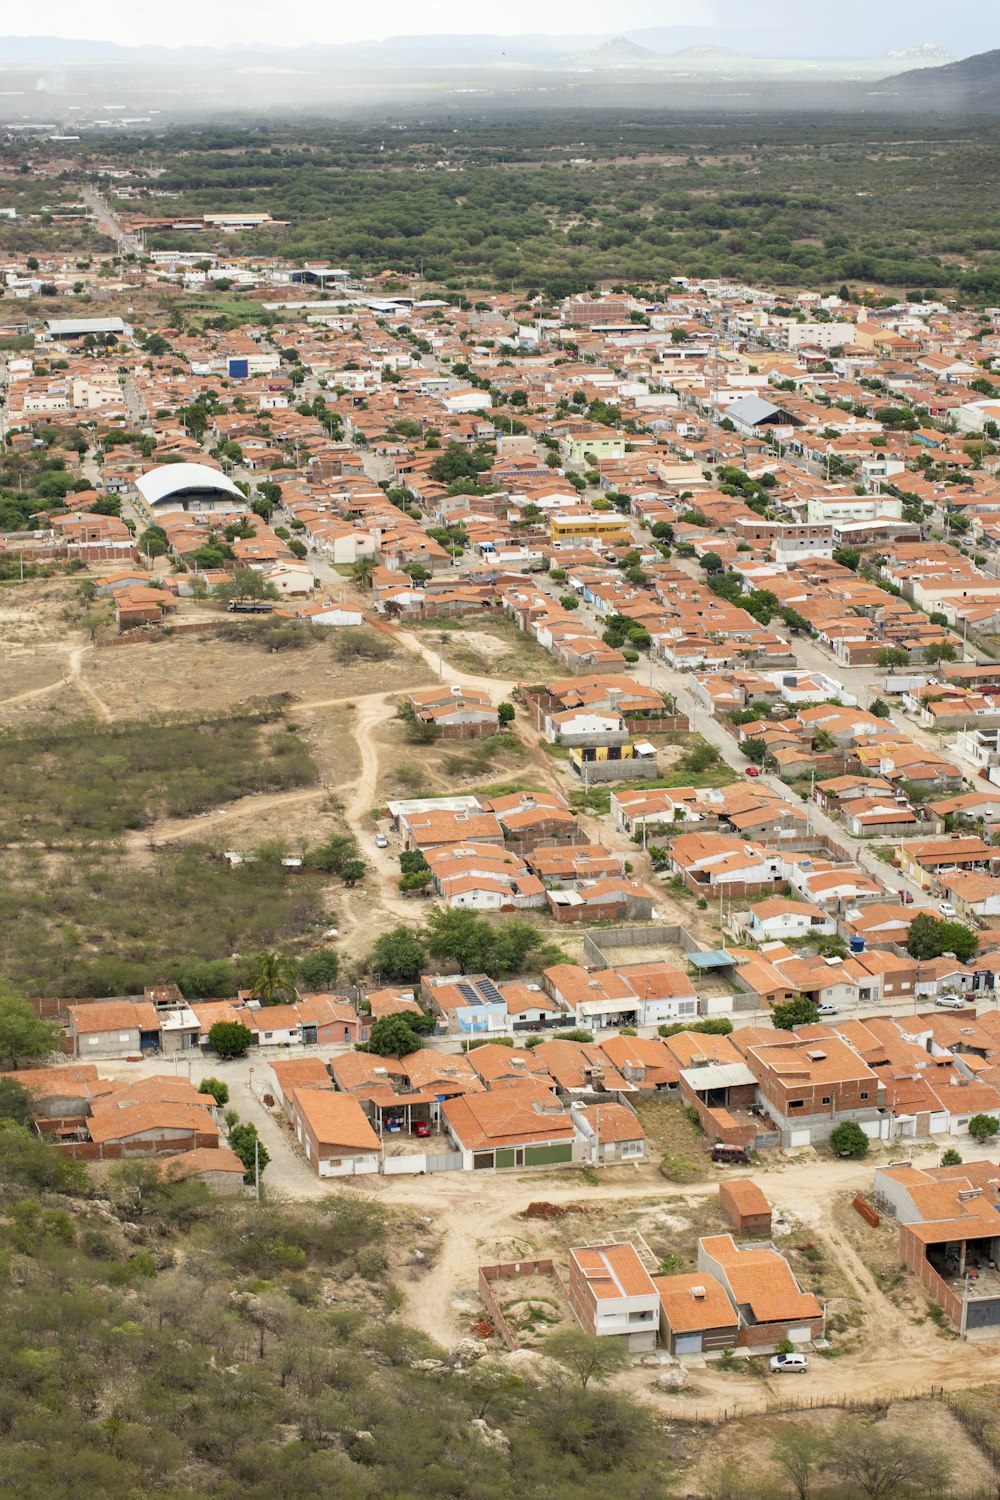 an aerial view of a small town in the desert